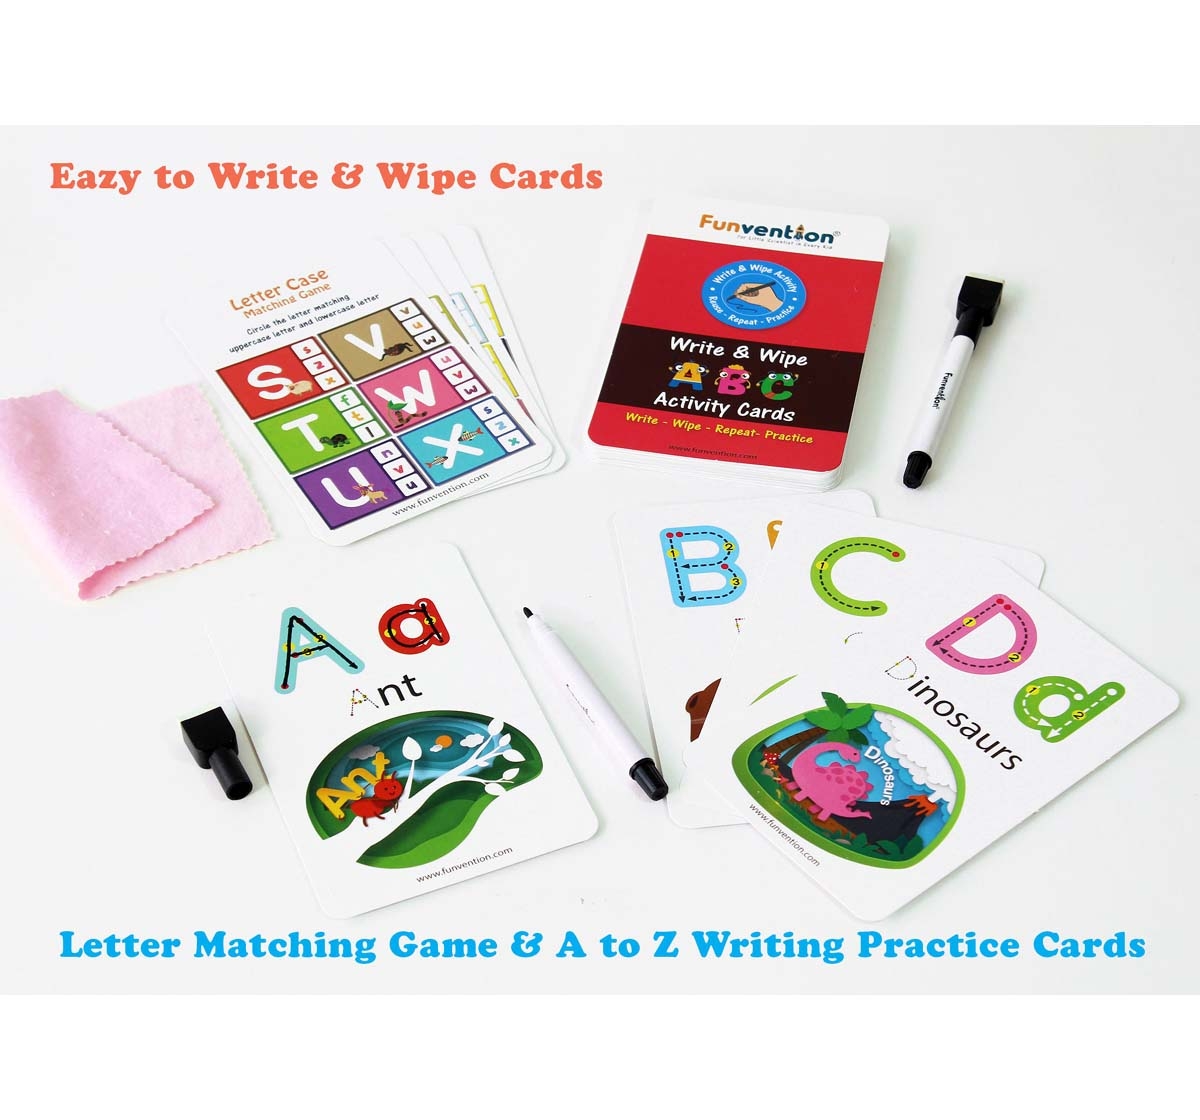 Funvention Write & Wipe Activity - Abc Alphabets Science Kits for Kids Age 3Y+